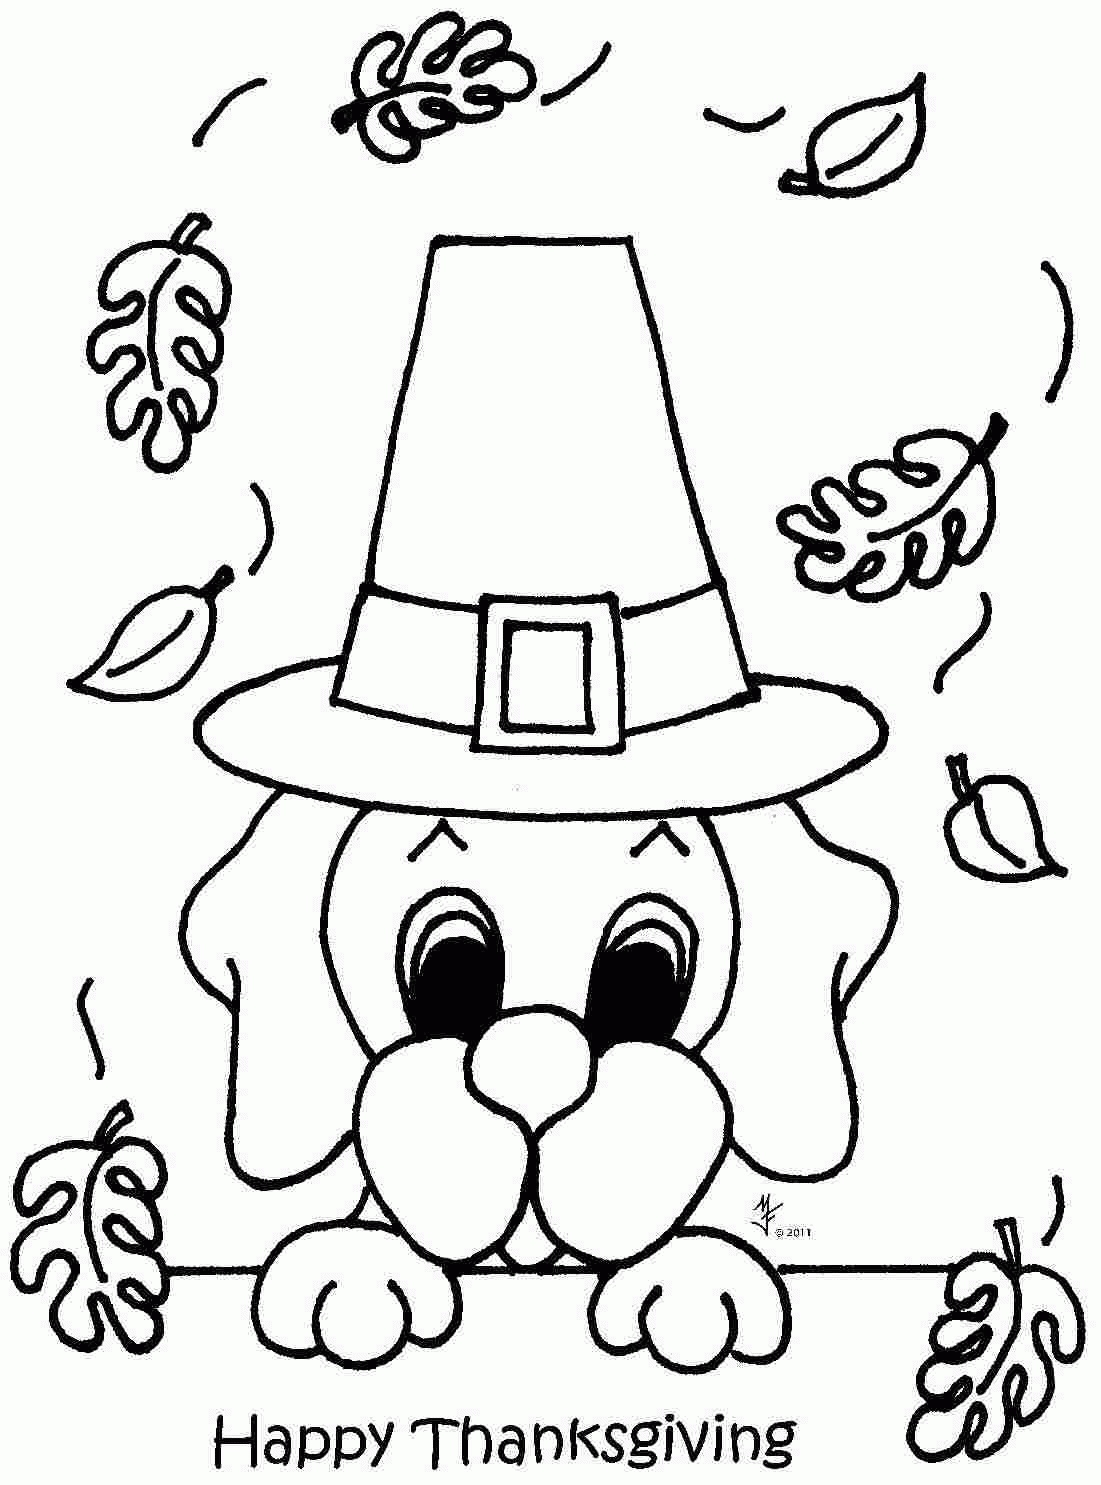 Thanksgiving Pilgrim Coloring Pages at GetColorings.com | Free